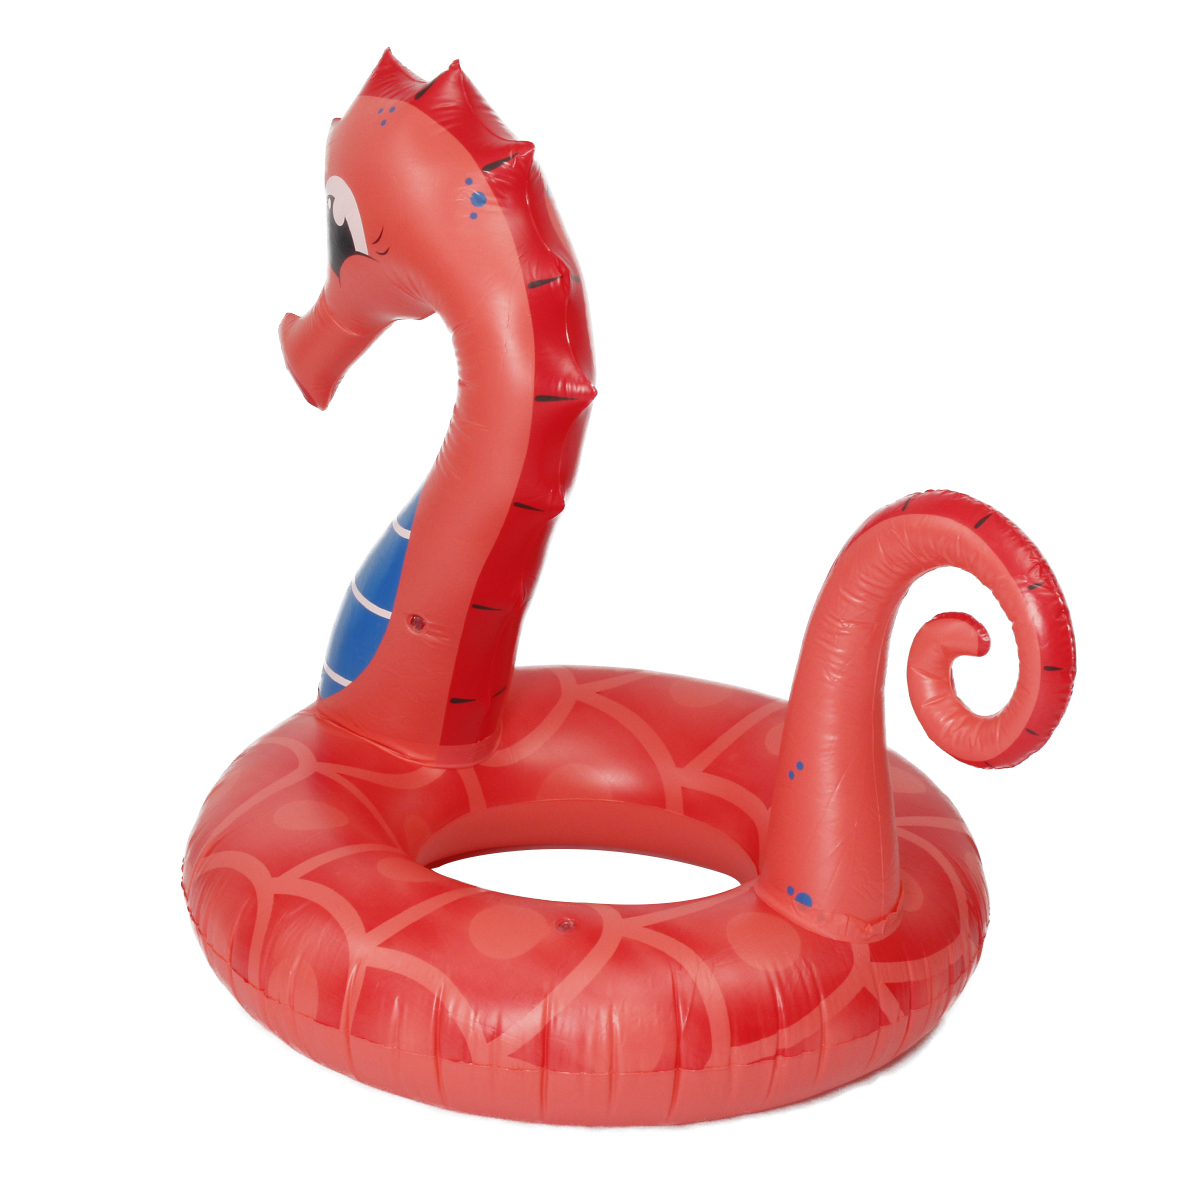 Large-Seahorse-Inflatable-Hippocampus-Giant-Swimming-Pool-Ring-Floats-Bed-Water-Pool-Raft-Camping-Be-1723619-5